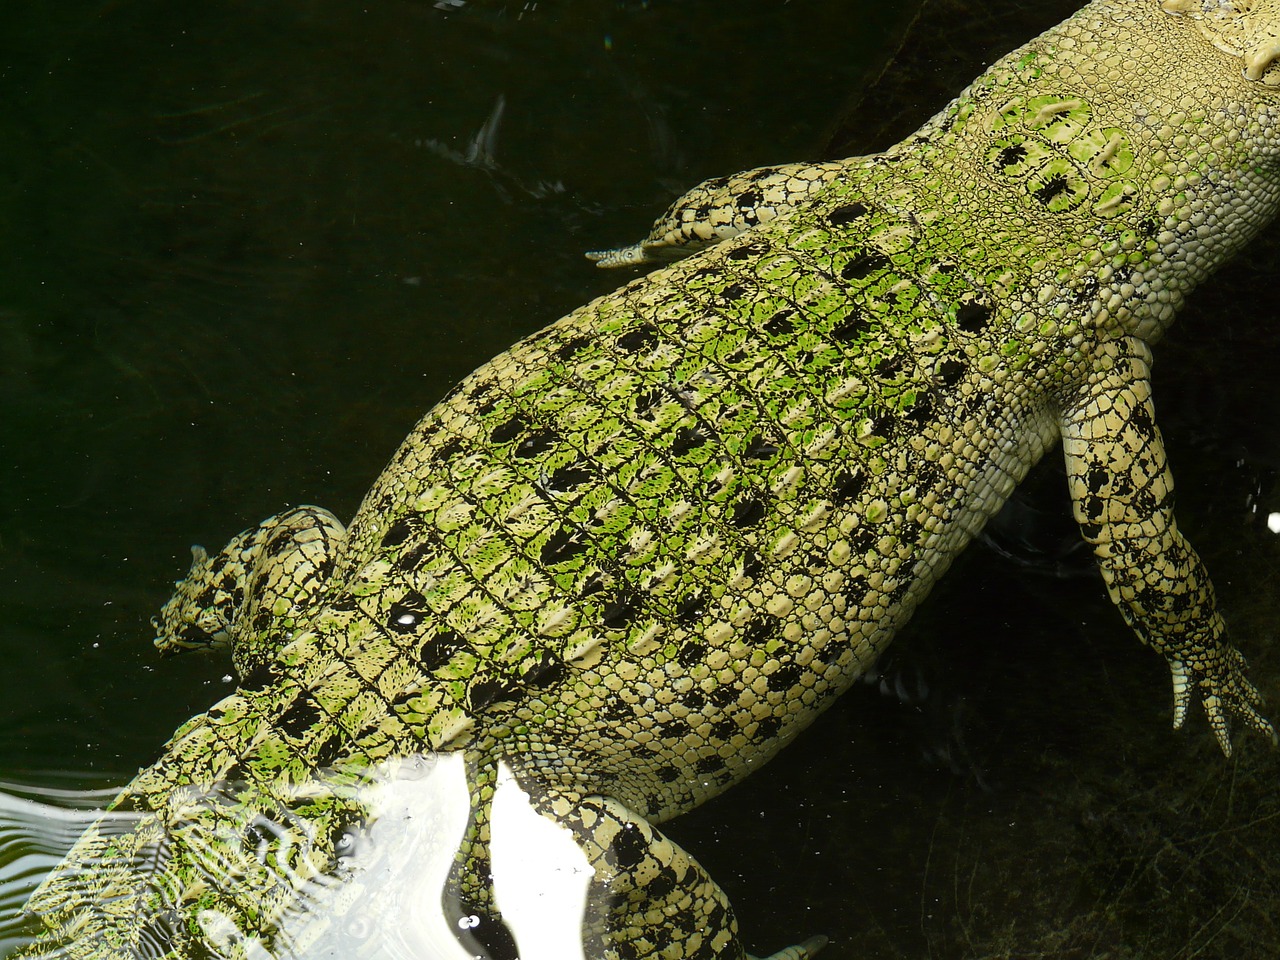 saltwater crocodile,crocodile,reptile,animal,creature,skin,scale,grain,pattern,free pictures, free photos, free images, royalty free, free illustrations, public domain